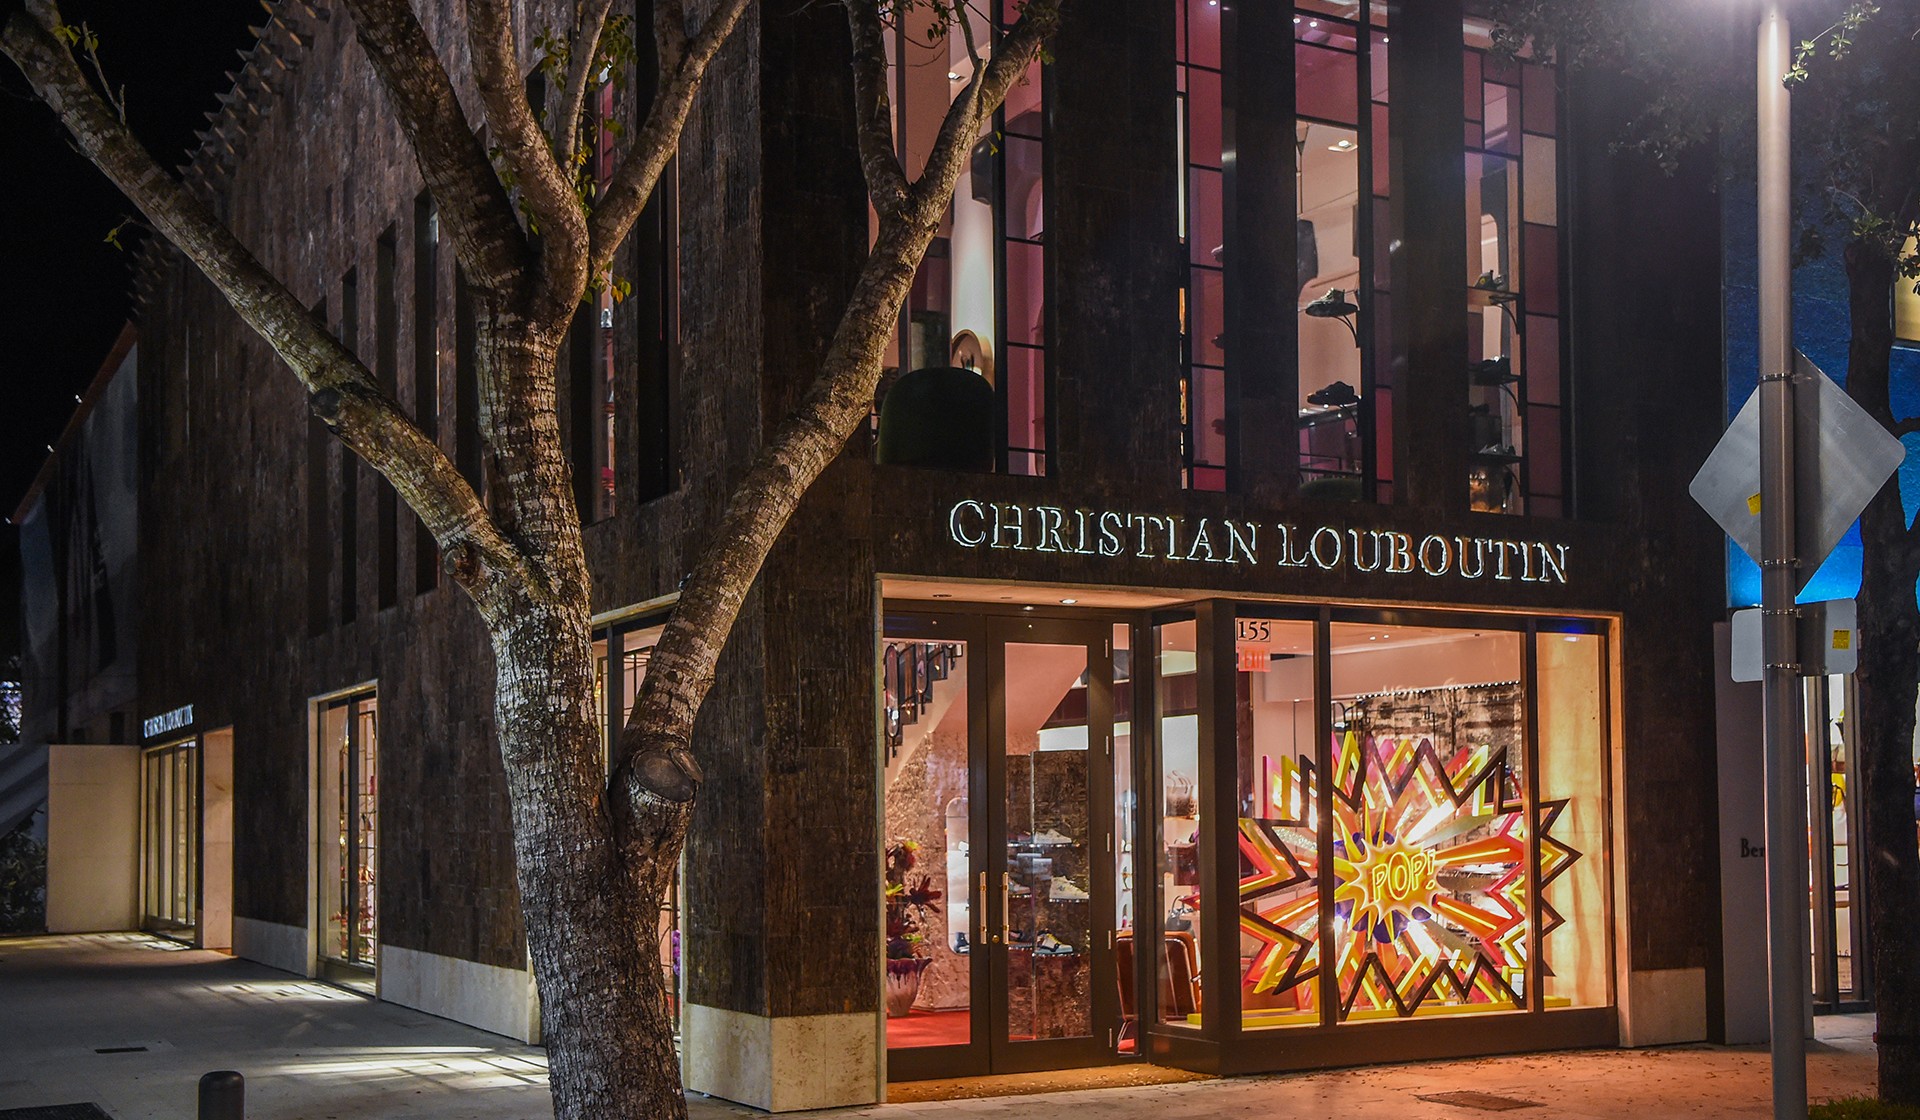 There's a Christian Louboutin outlet in miami with 40% off. More